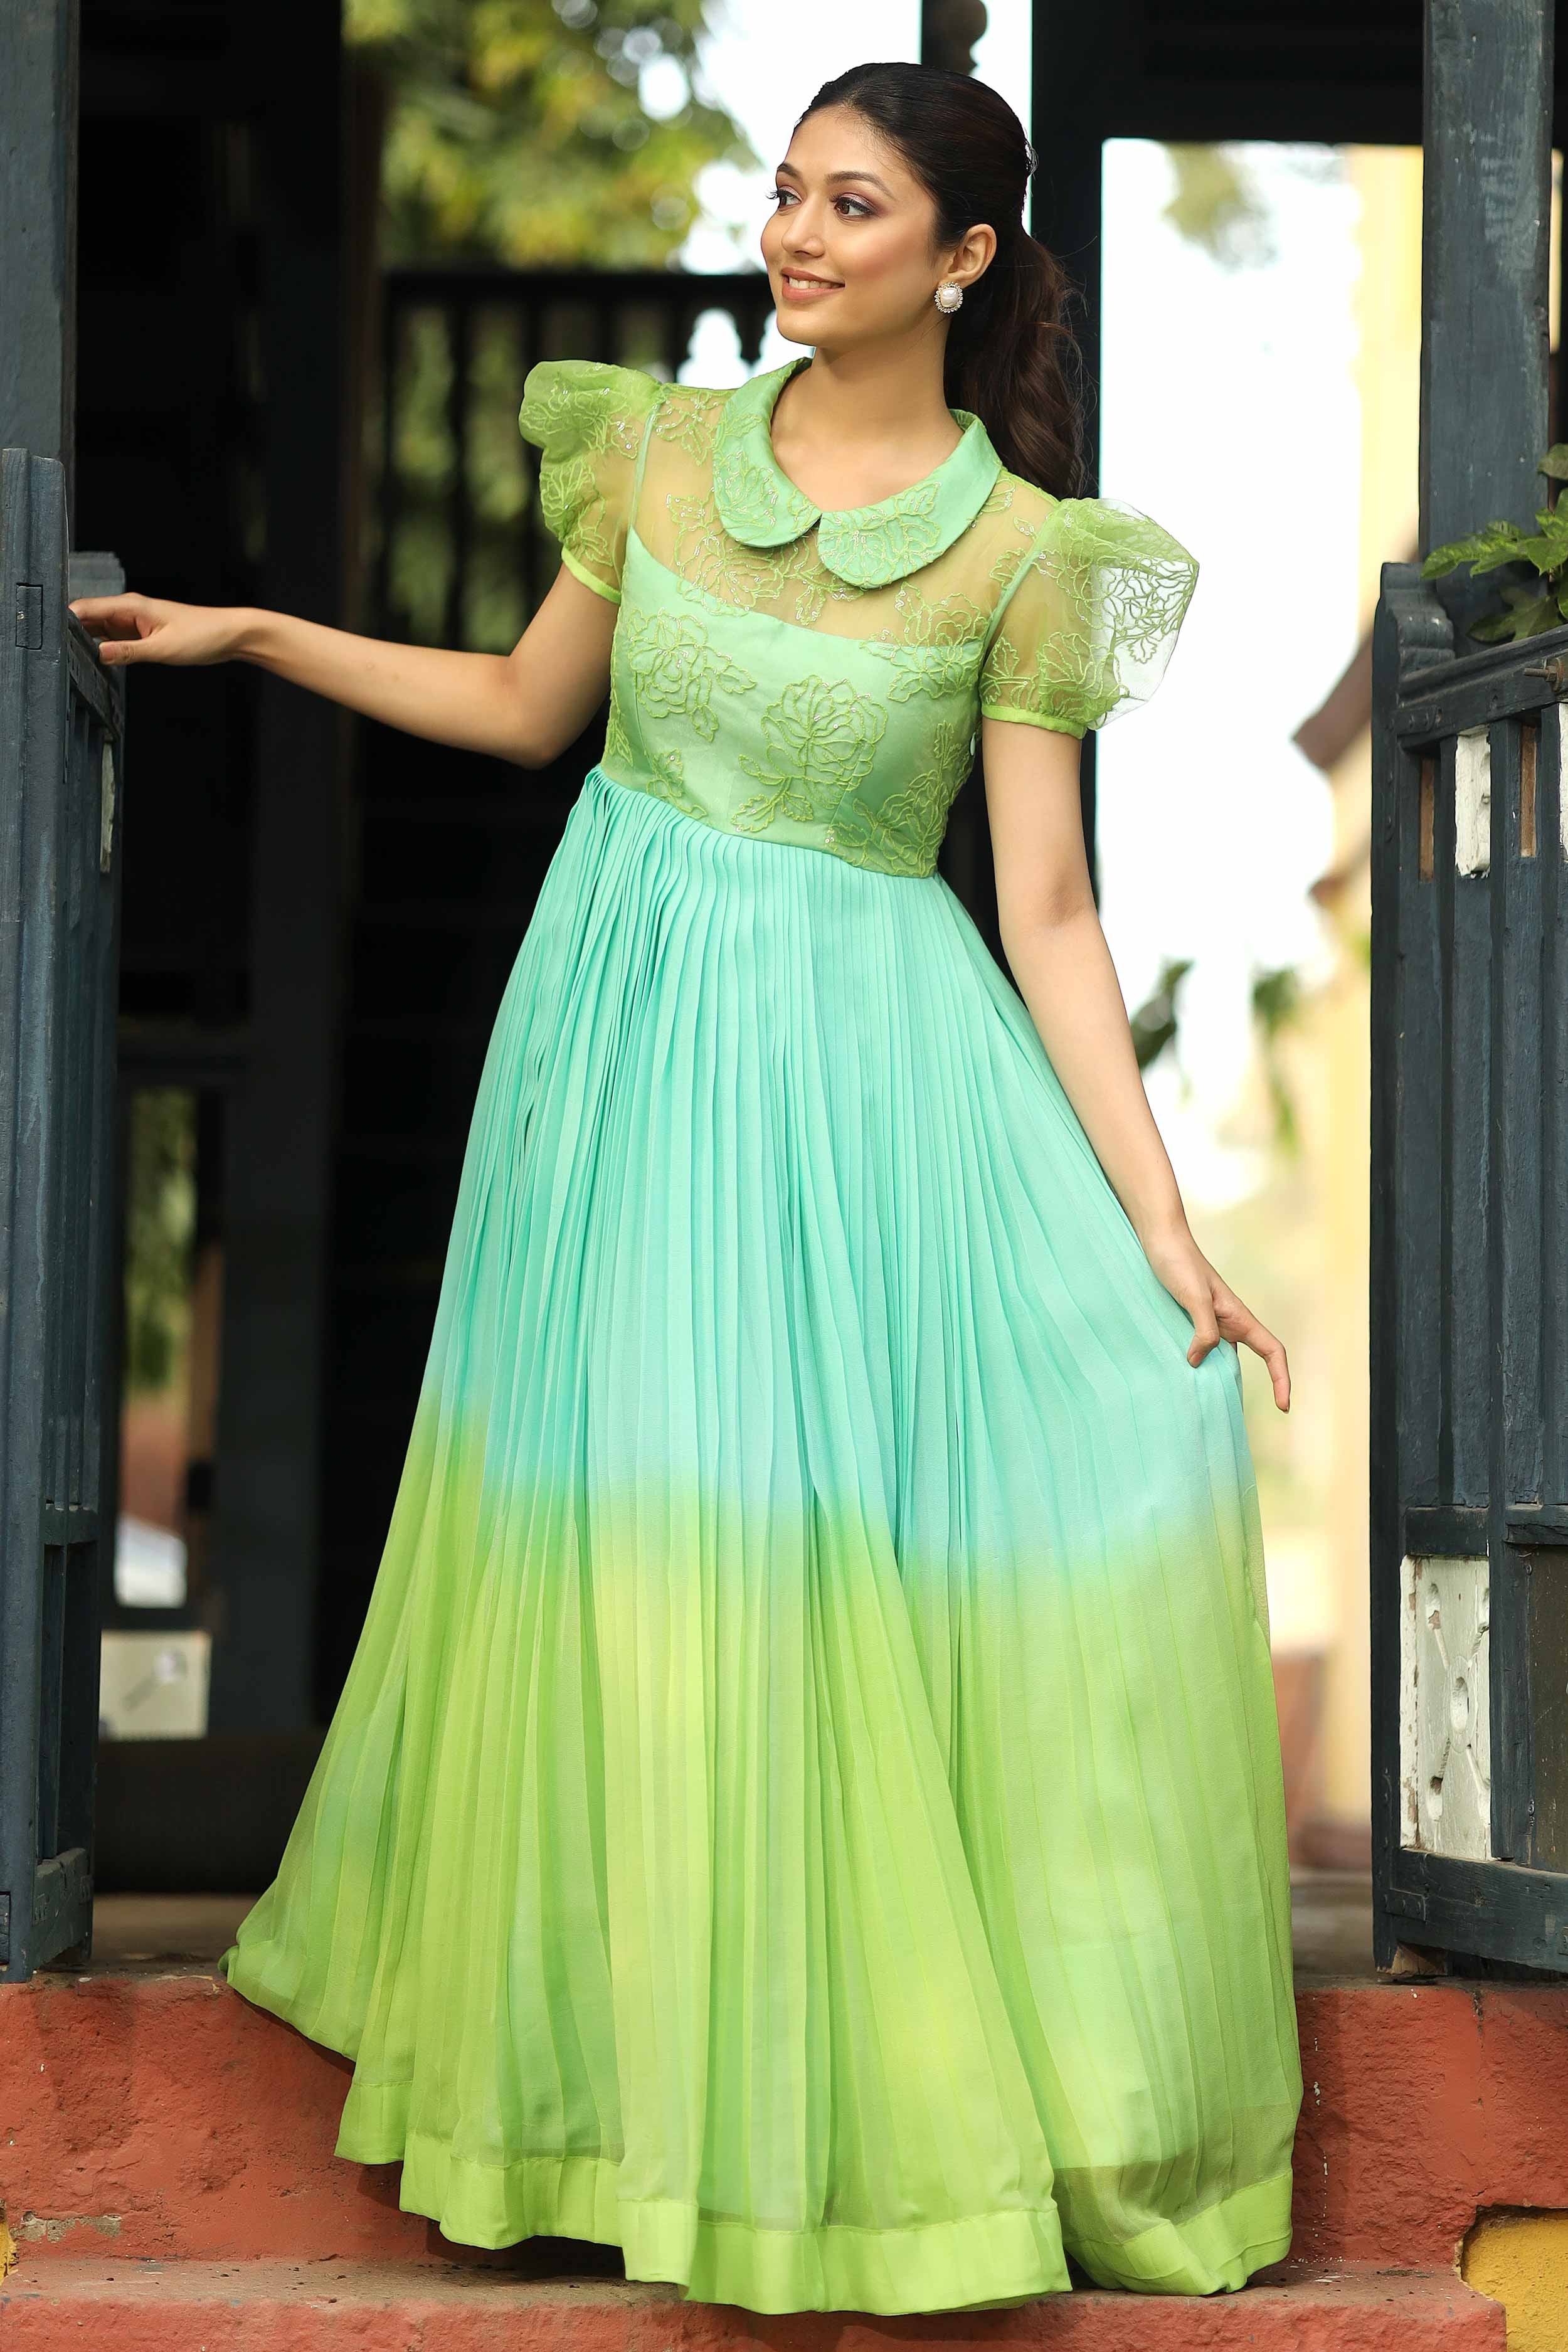 Party Wear Dresses For Women, Party Wear Outfits Online